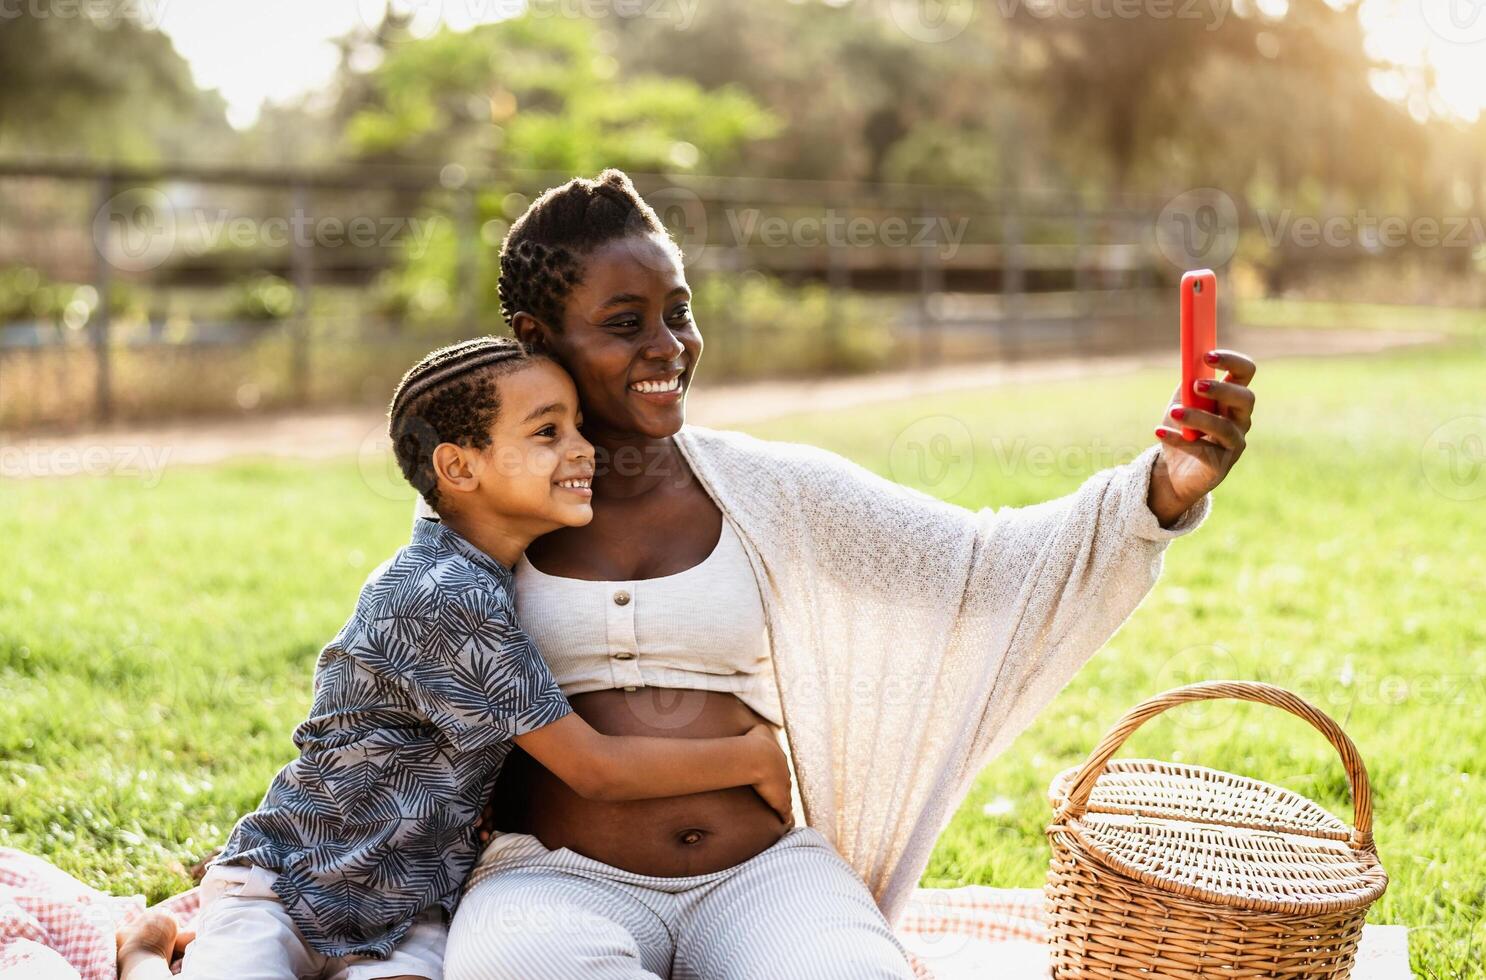 Happy African pregnant mother taking selfie with his son while doing a picnic during weekend in public park - Maternity and parents lifestyle concept photo